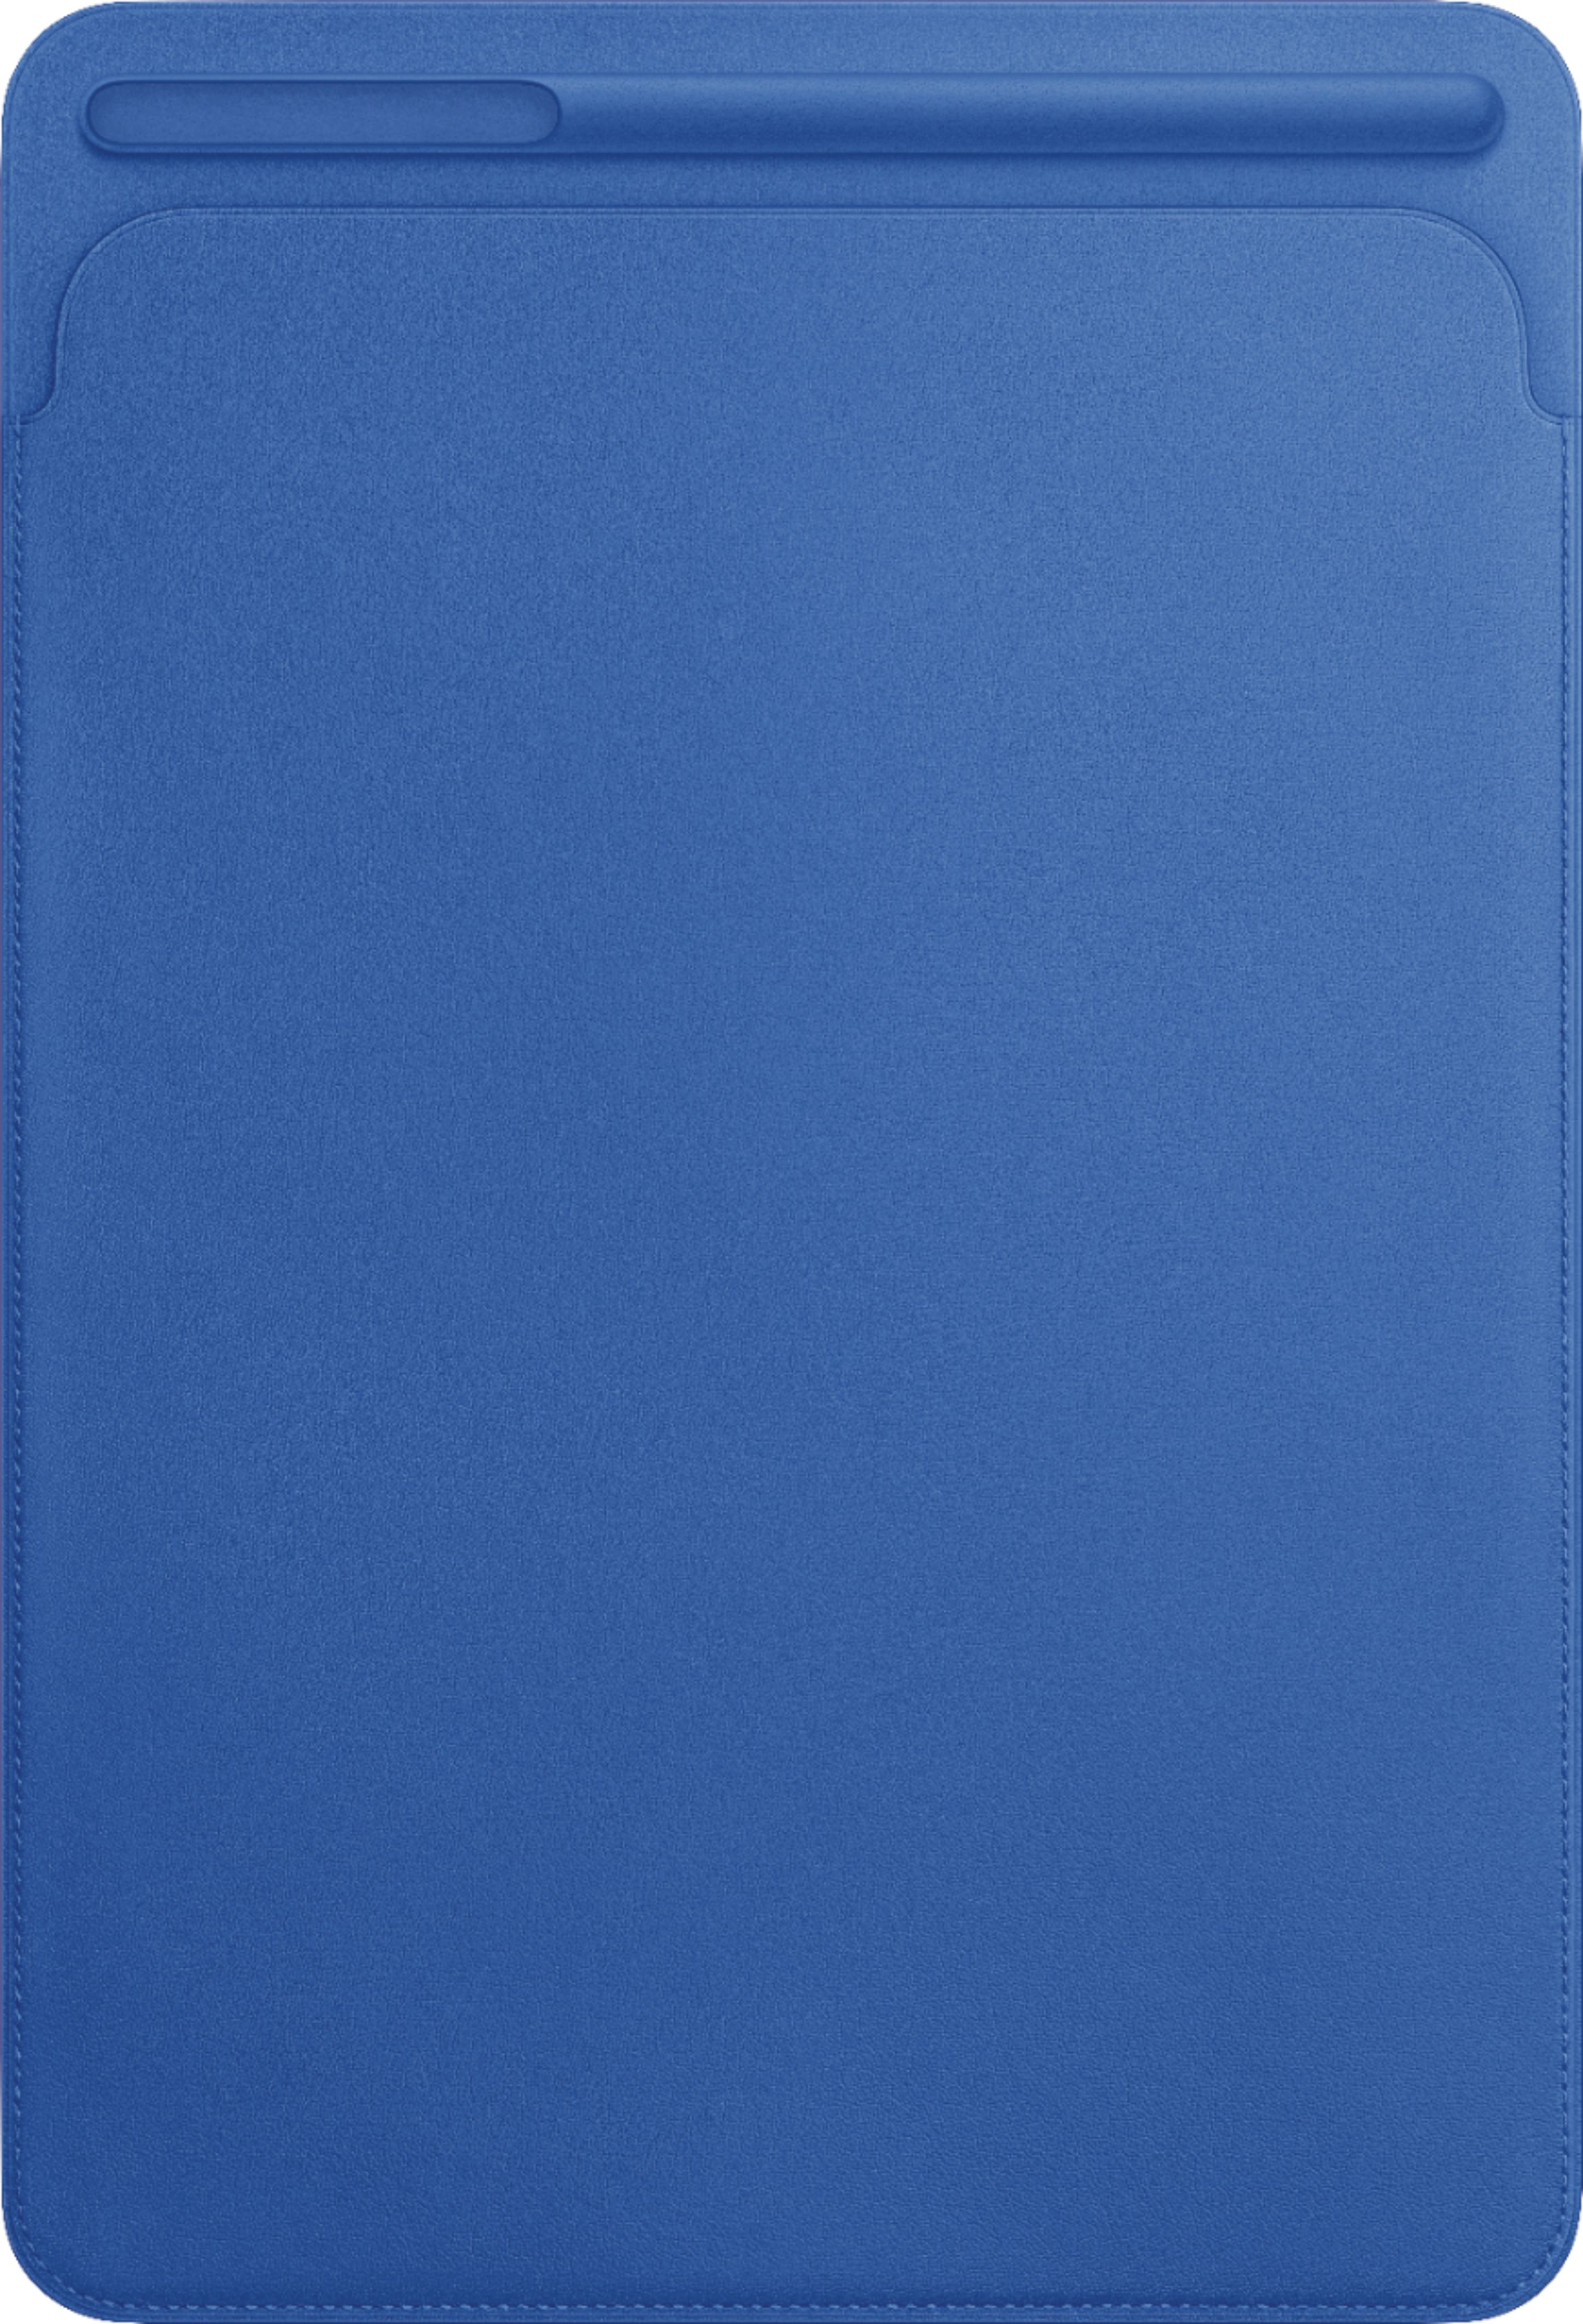 Apple - Leather Sleeve for 10.5-inch iPad Pro - Electric Blue - .99